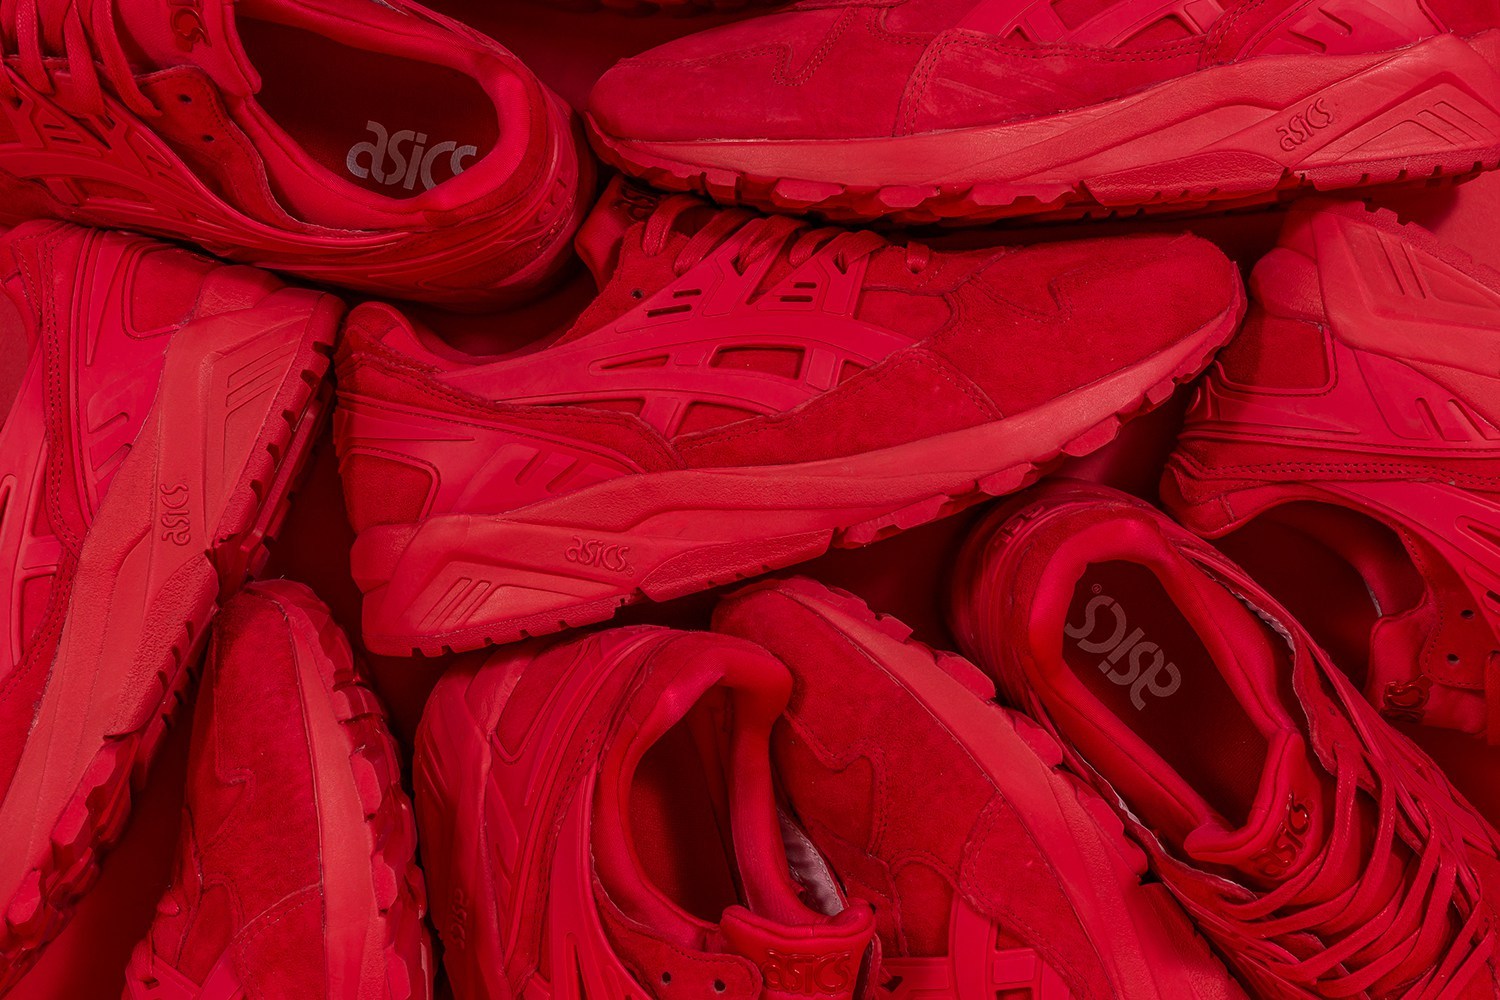 Packer Shoes x ASICS Gel-Kayano Trainer